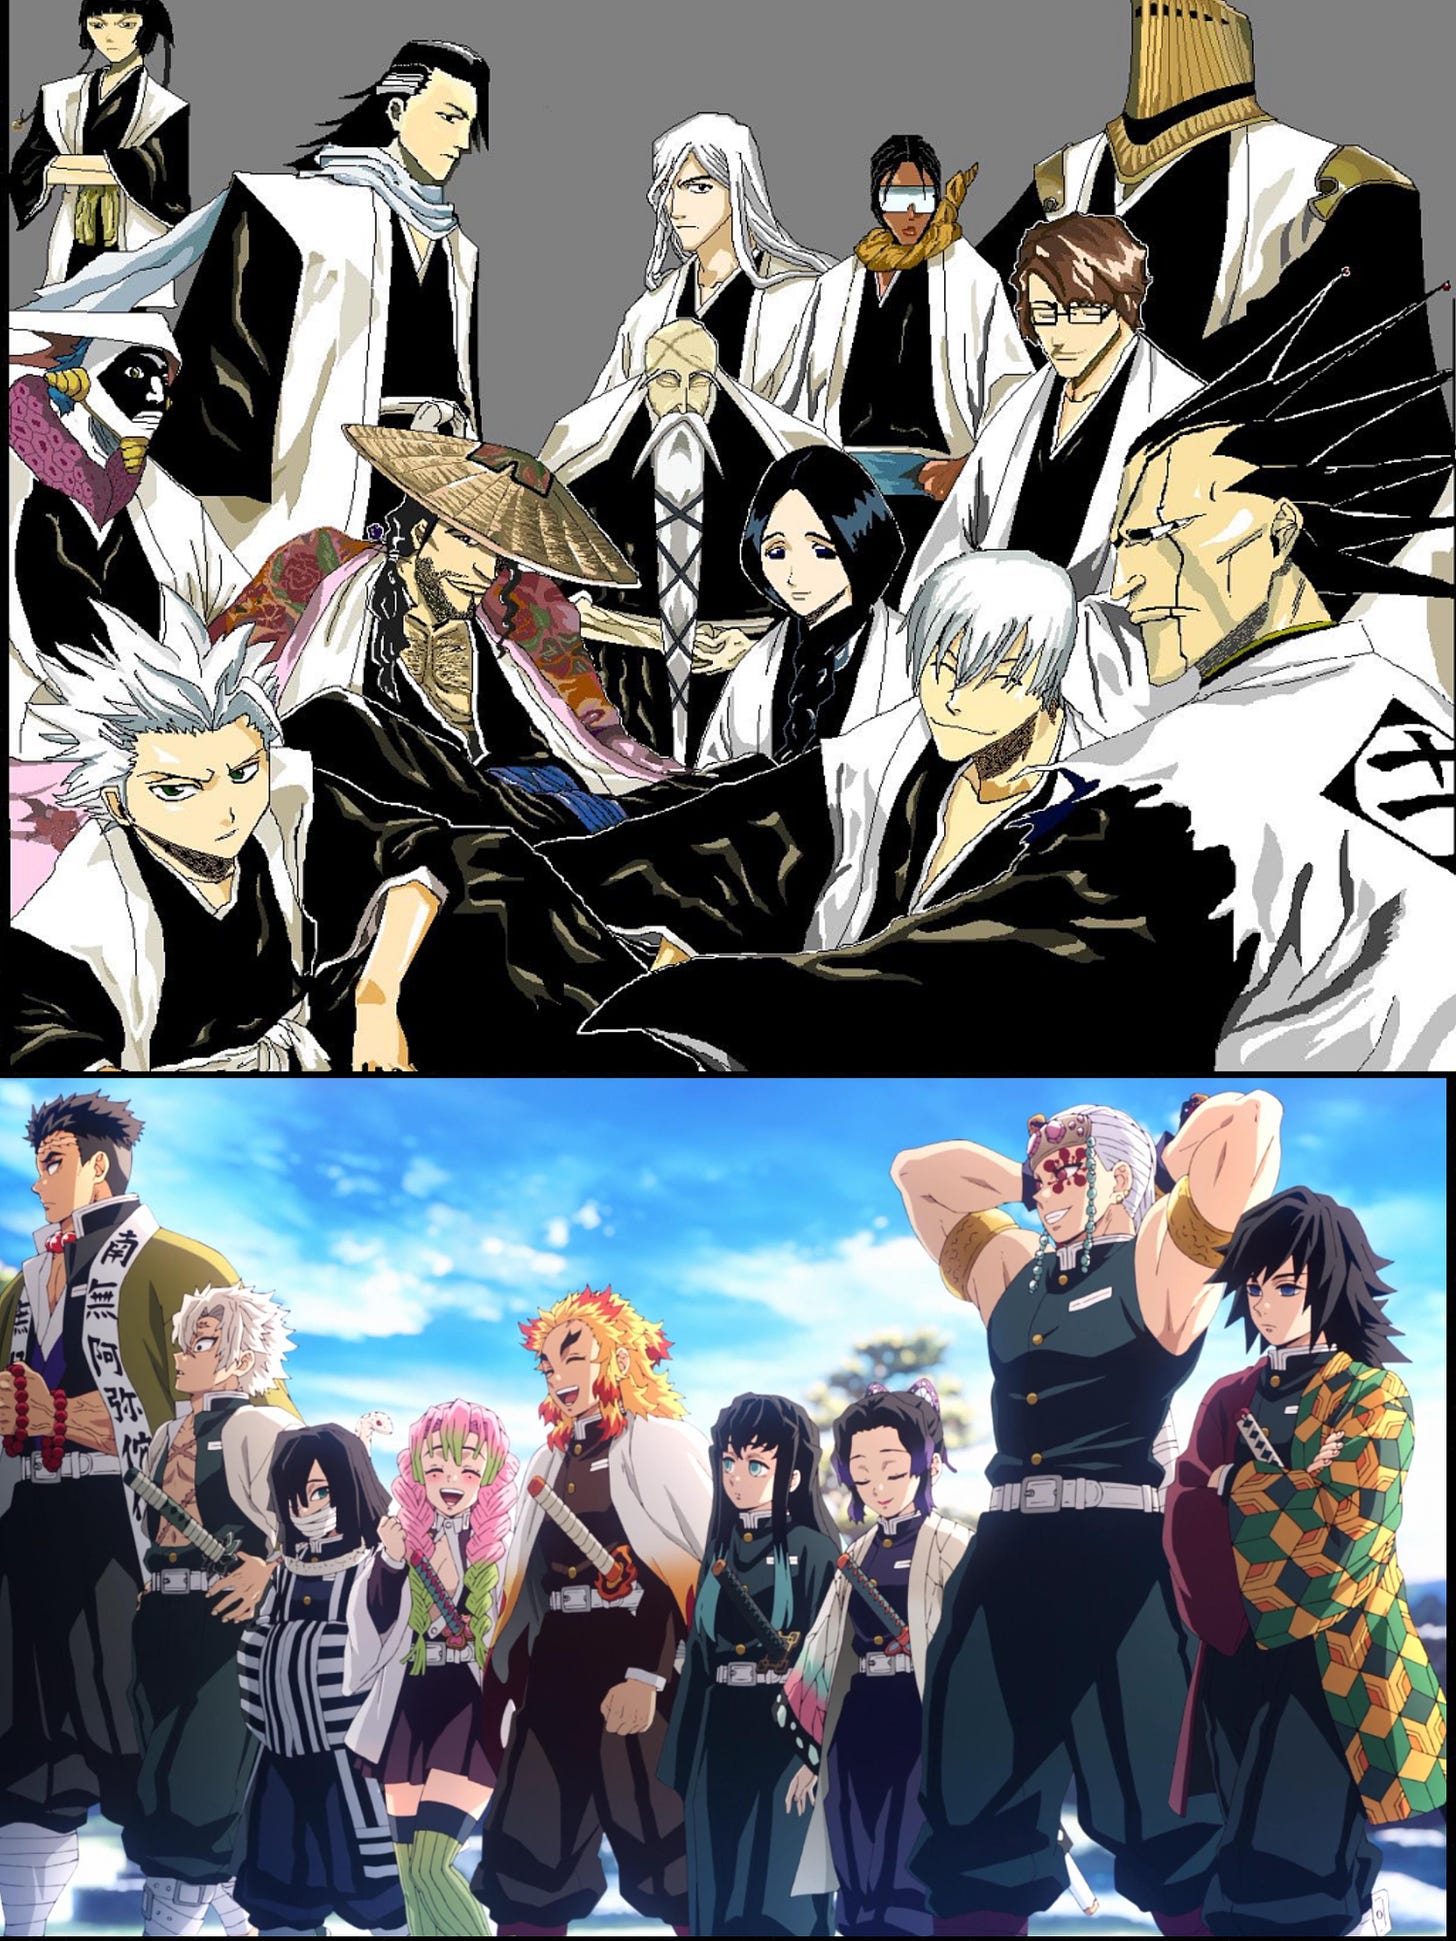 I just finished watching season 1 of Demon slayer and I gotta say the  Hashira's remind me a lot of the Gotei 13 Captains from Bleach. Or is it  just me? : r/KimetsuNoYaiba